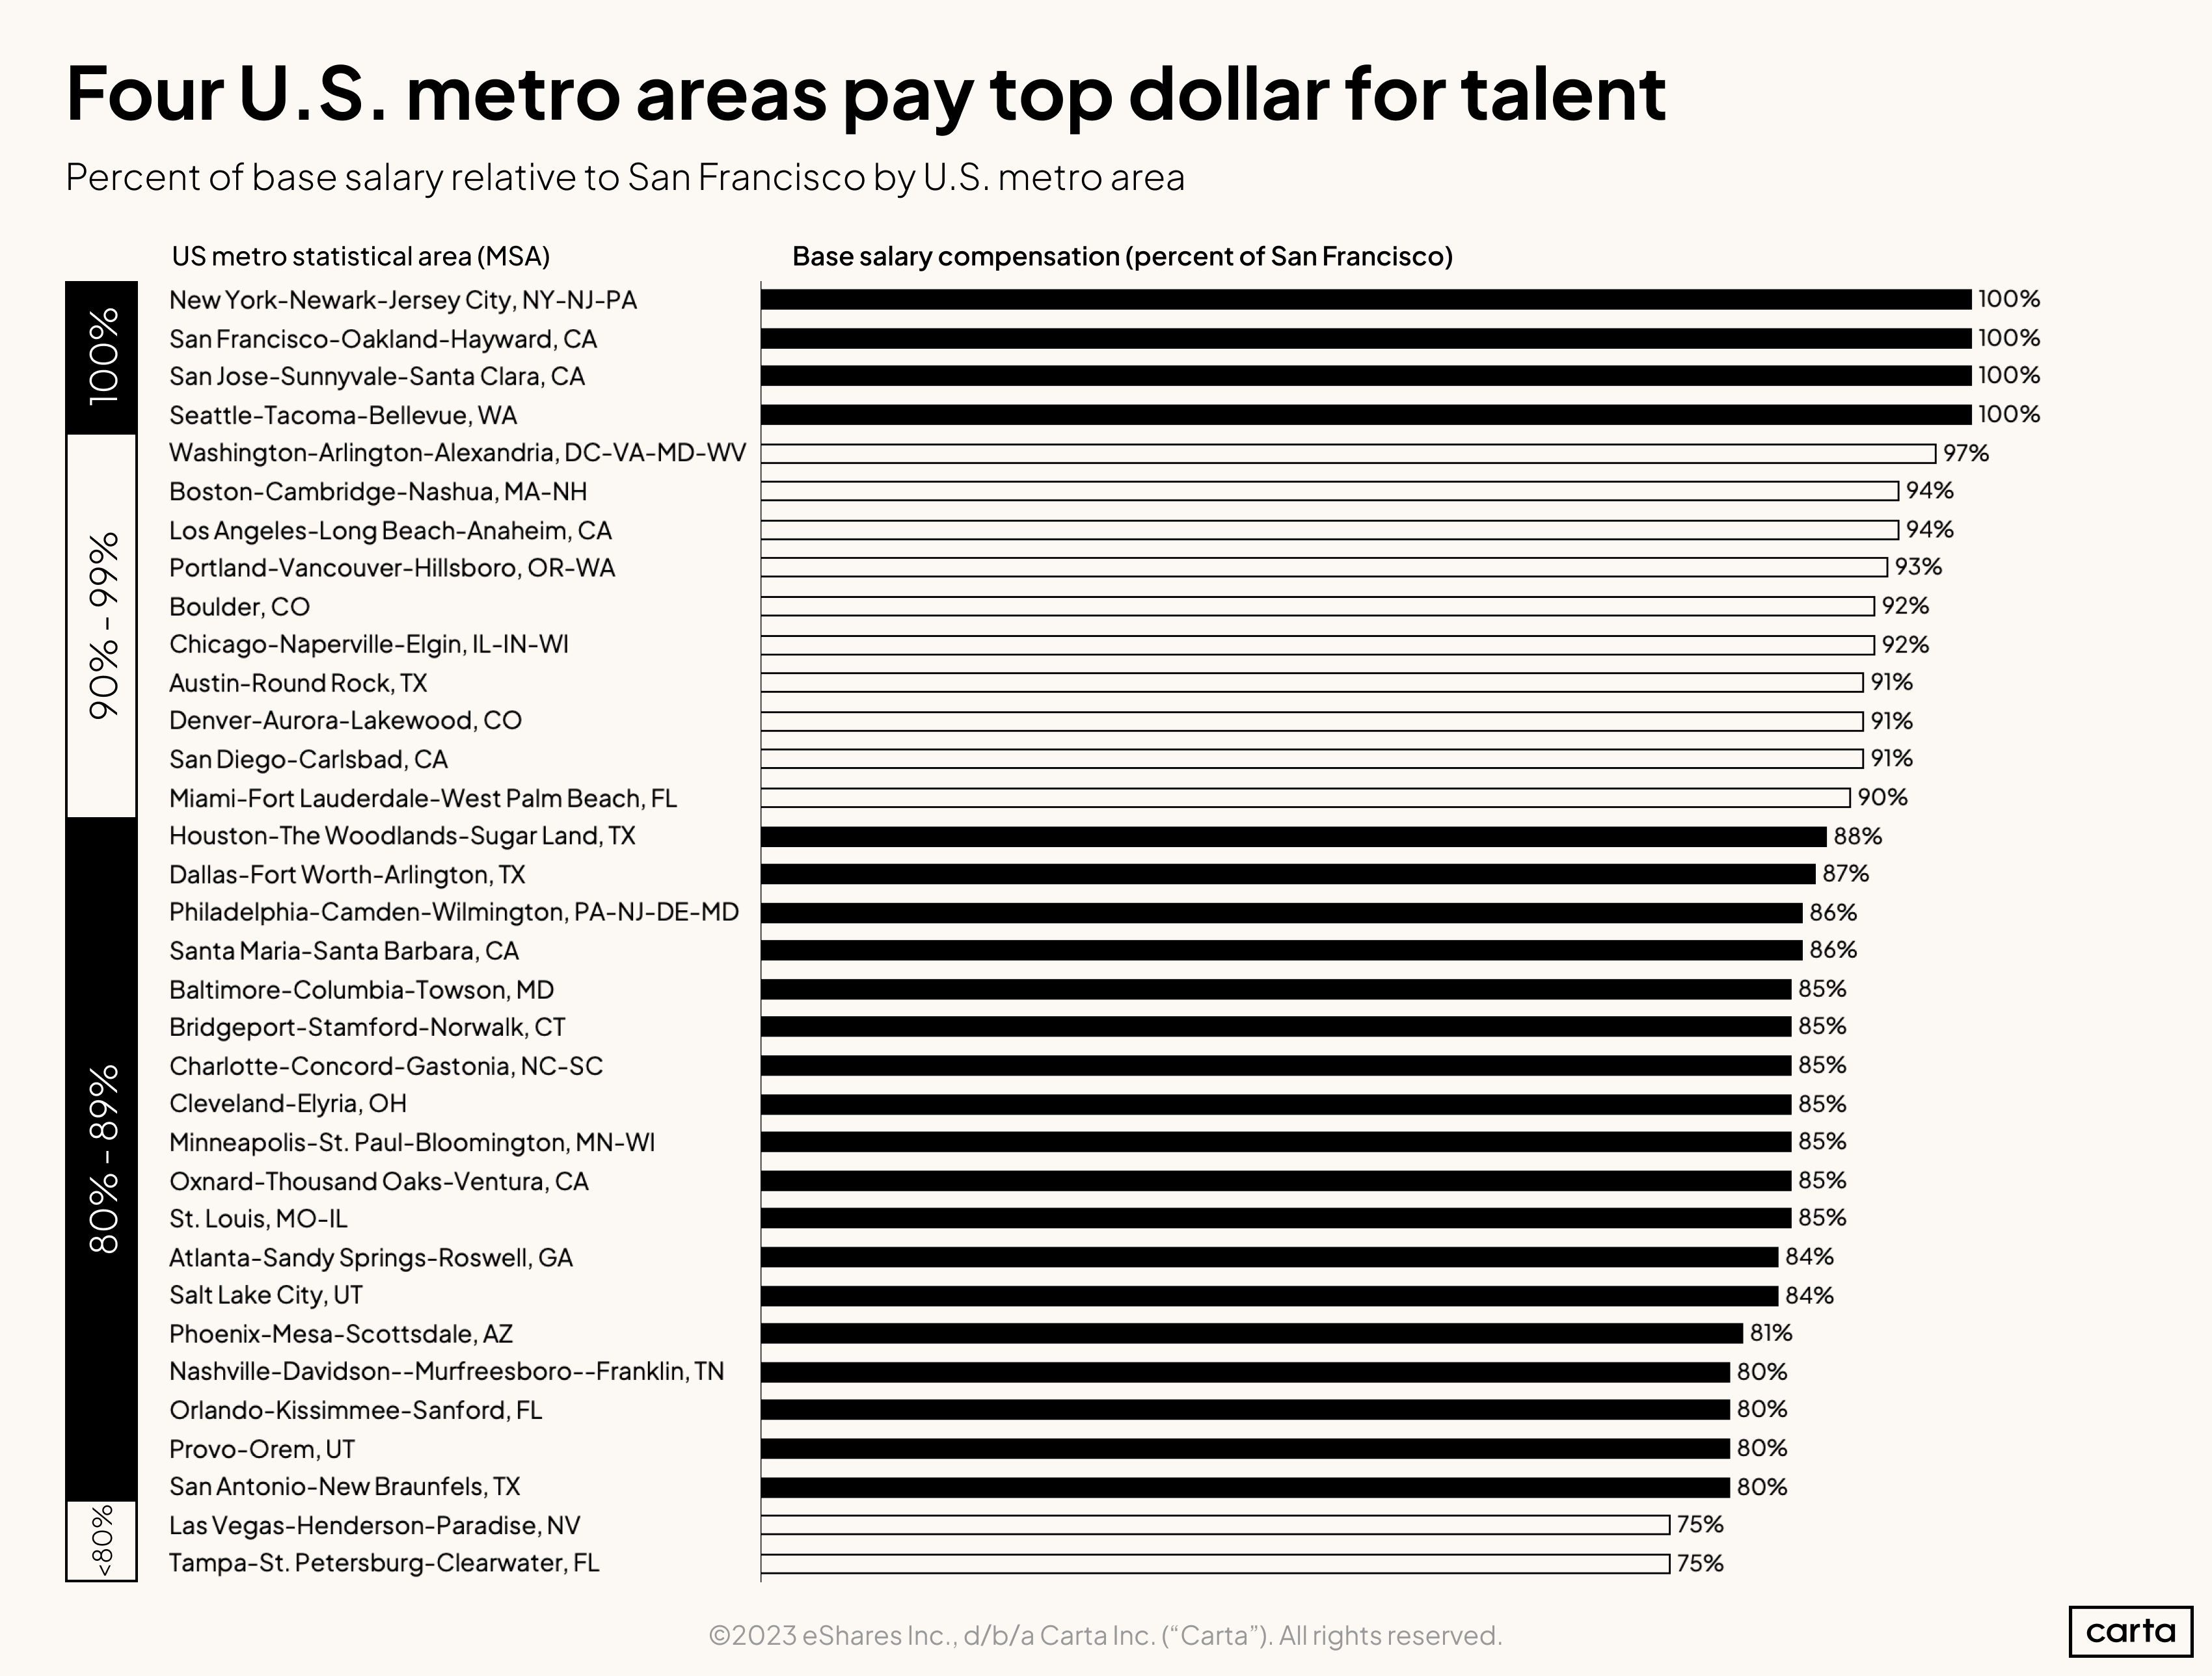 Percent of base salary relative to San Francisco by U.S. metro area